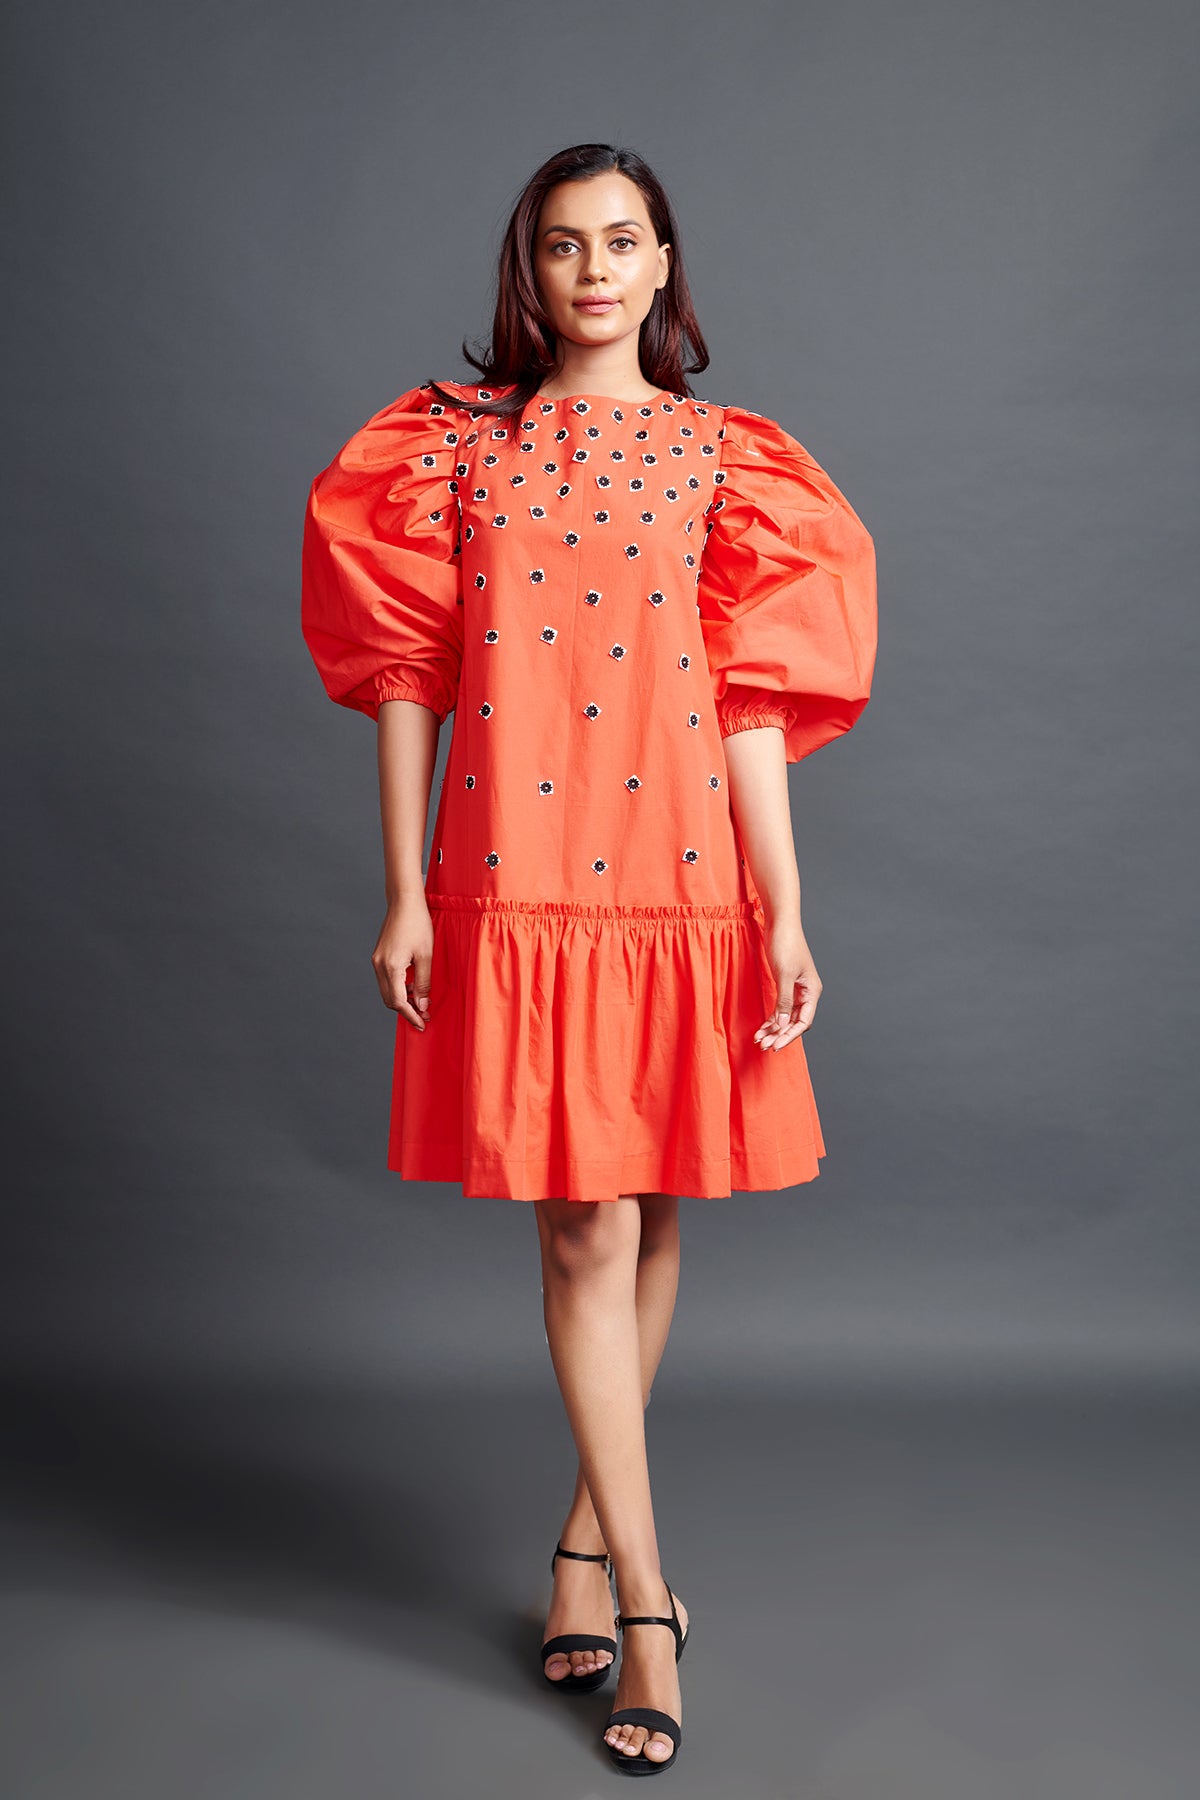 Image of ORANGE GATHERED BACKLESS DRESS IN COTTON BASE WITH CUTWORK EMBROIDERY. From savoirfashions.com